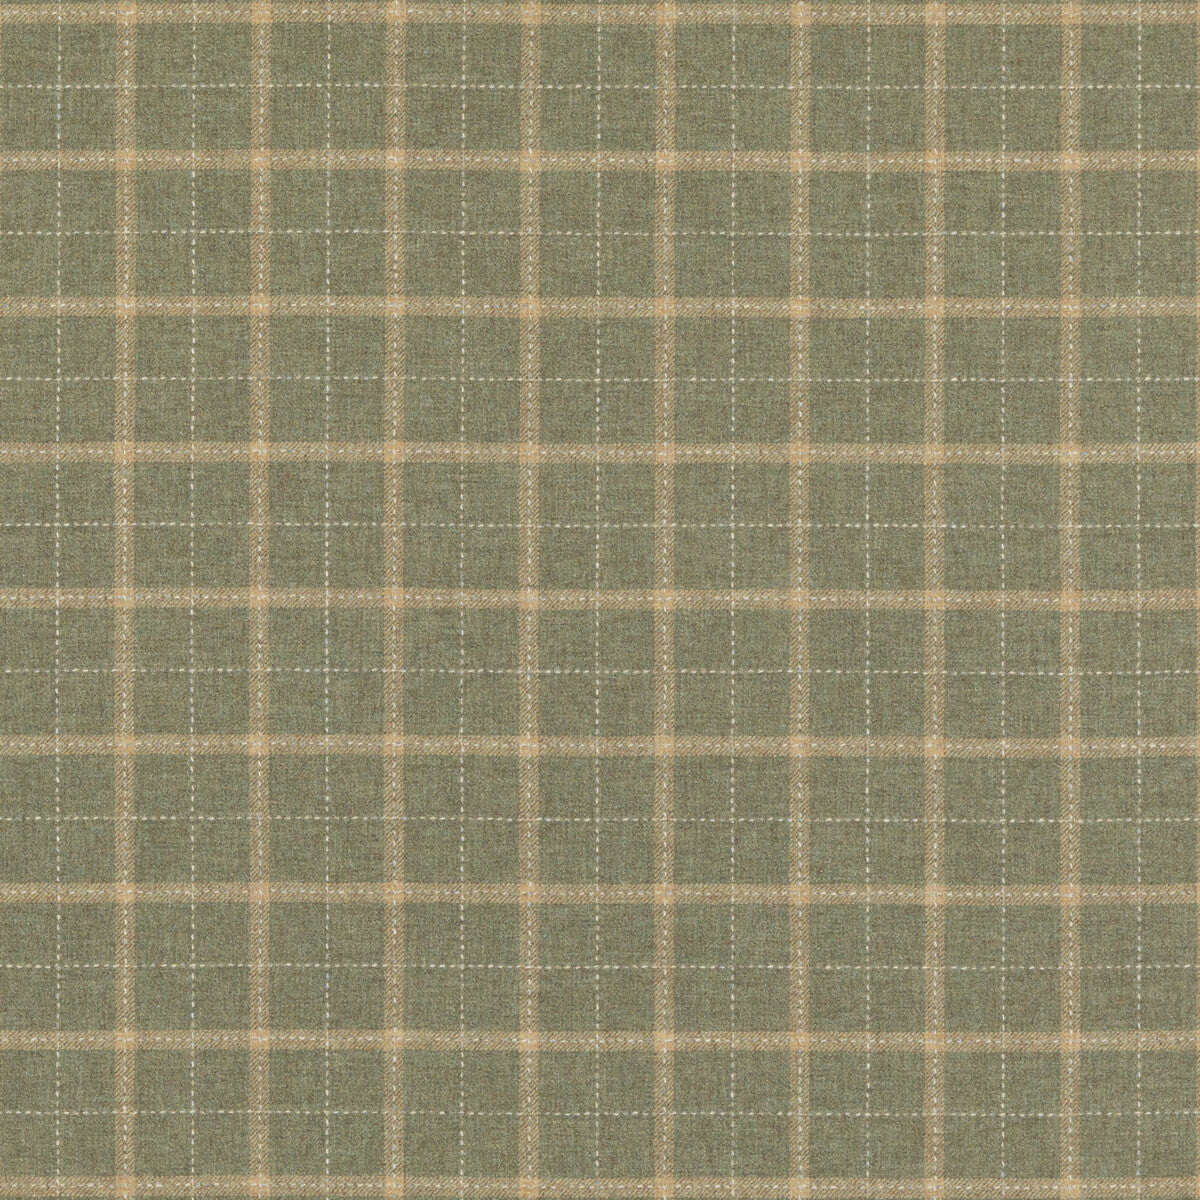 Bowmont fabric in lovat color - pattern FD806.R106.0 - by Mulberry in the Mulberry Wools III collection